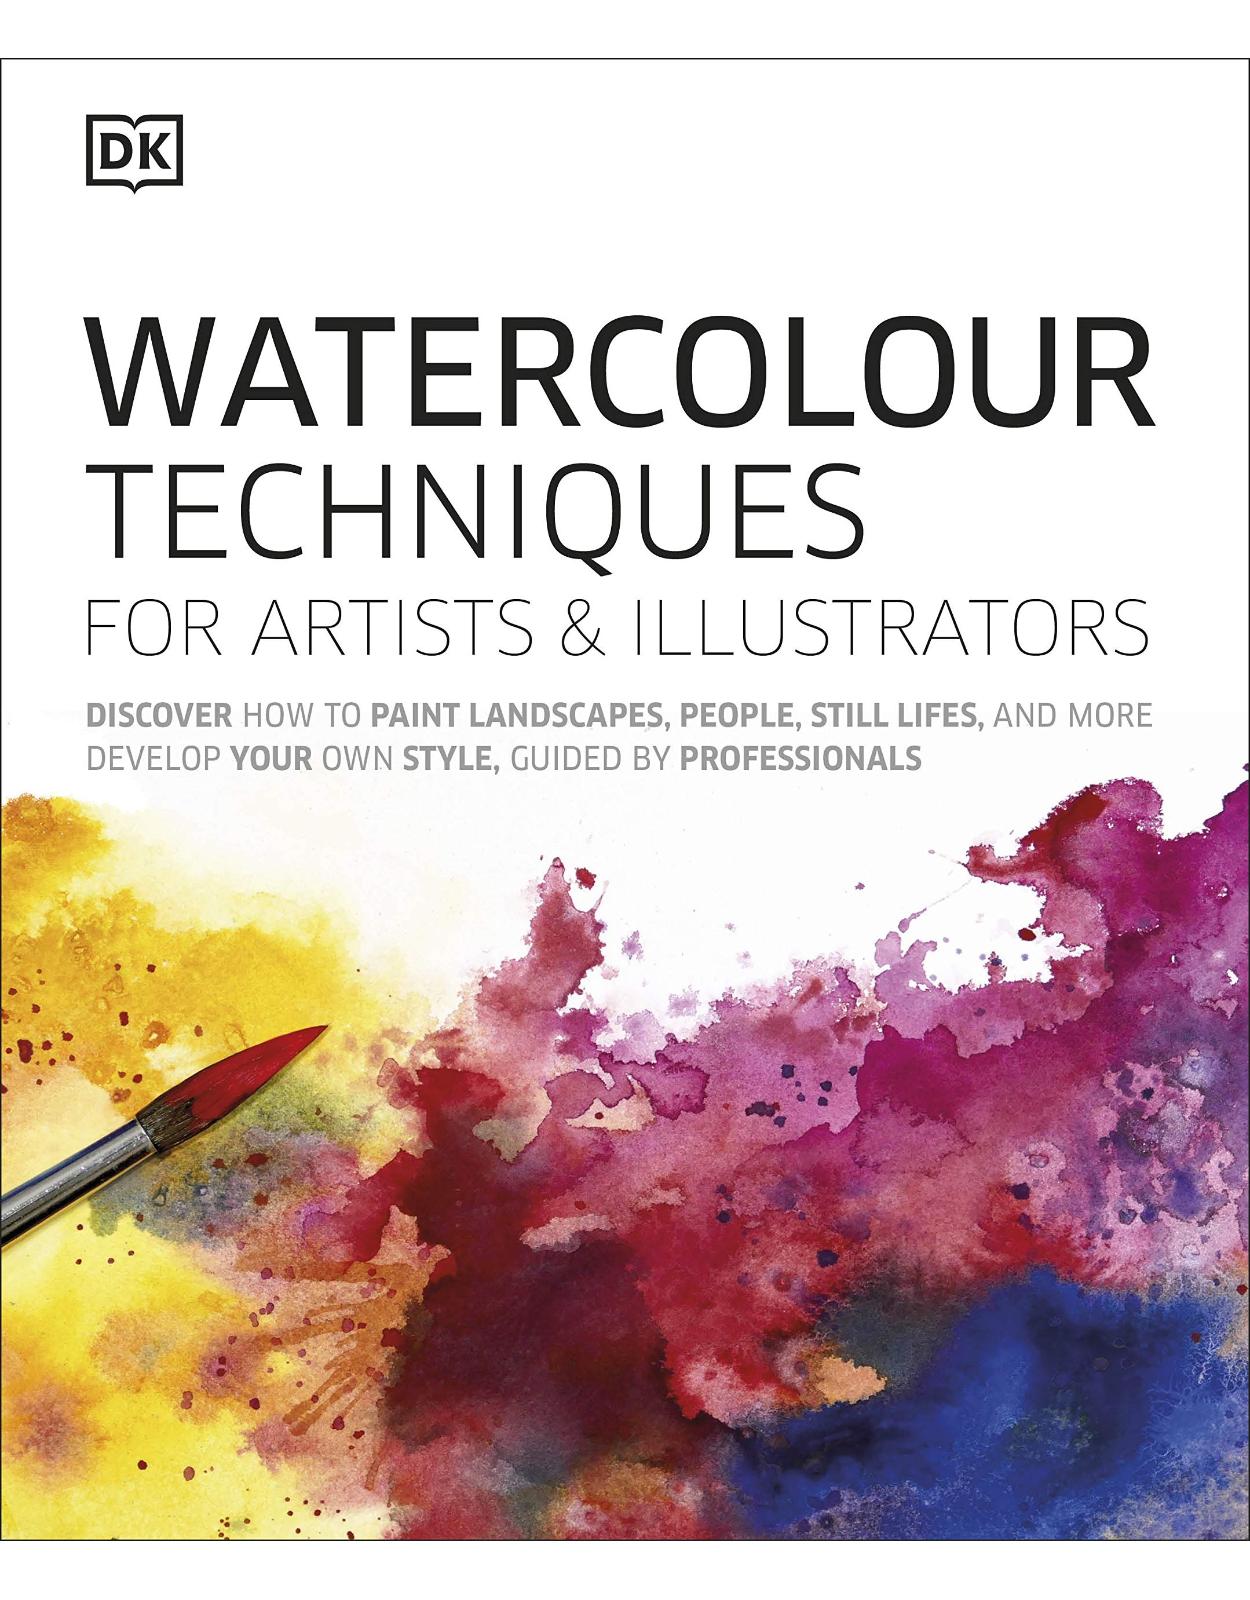 Watercolour Techniques for Artists and Illustrators: Discover how to paint landscapes, people, still lifes, and more